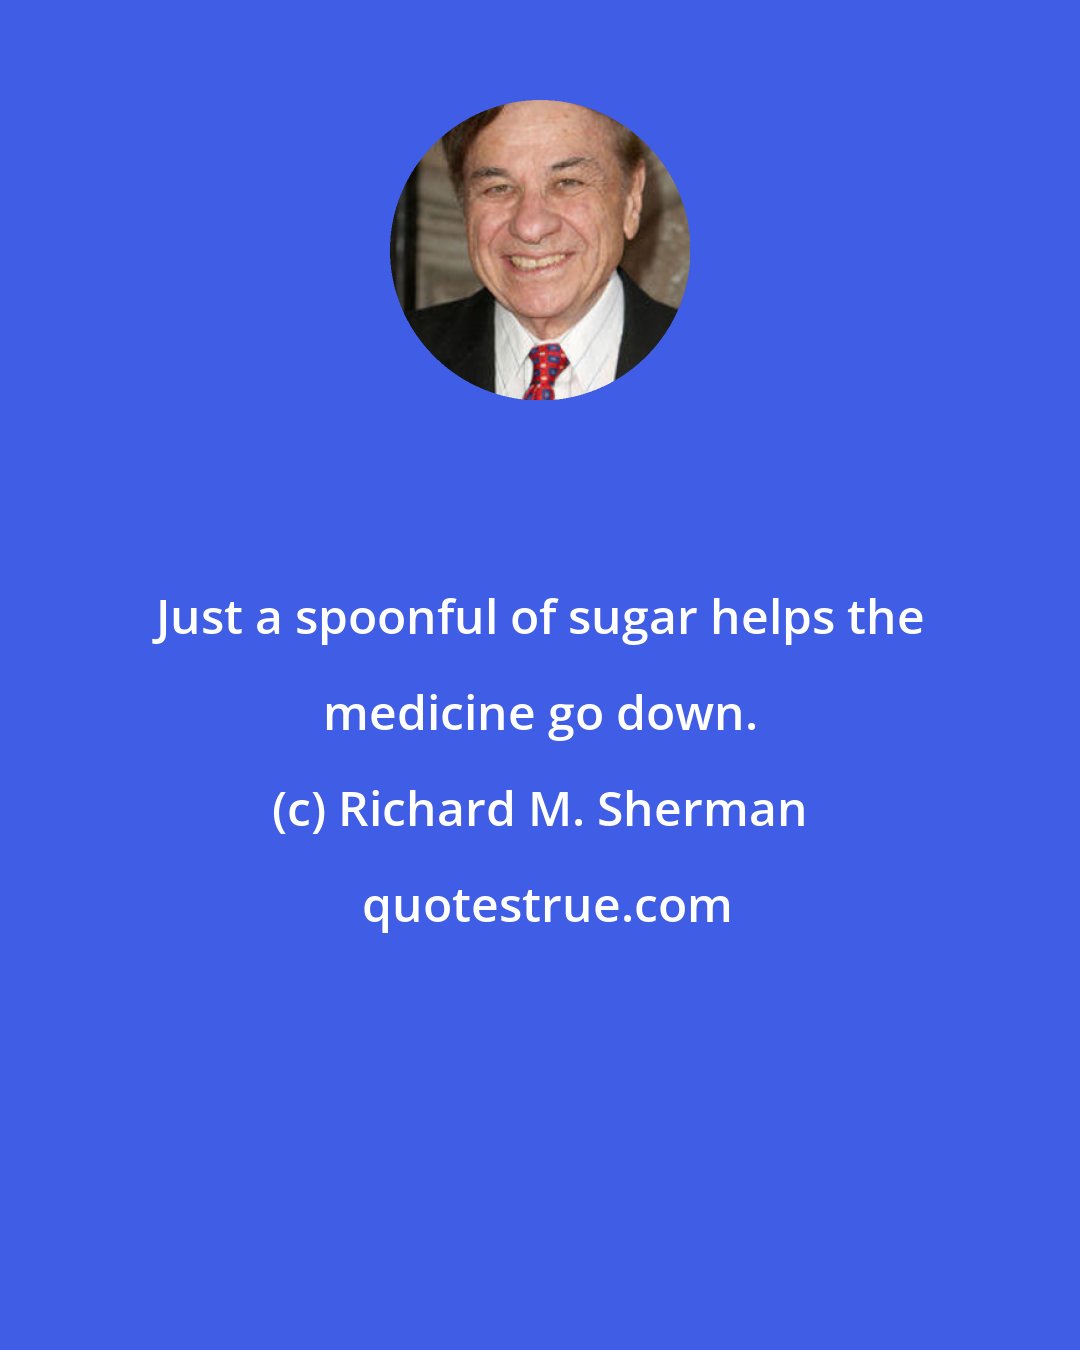 Richard M. Sherman: Just a spoonful of sugar helps the medicine go down.